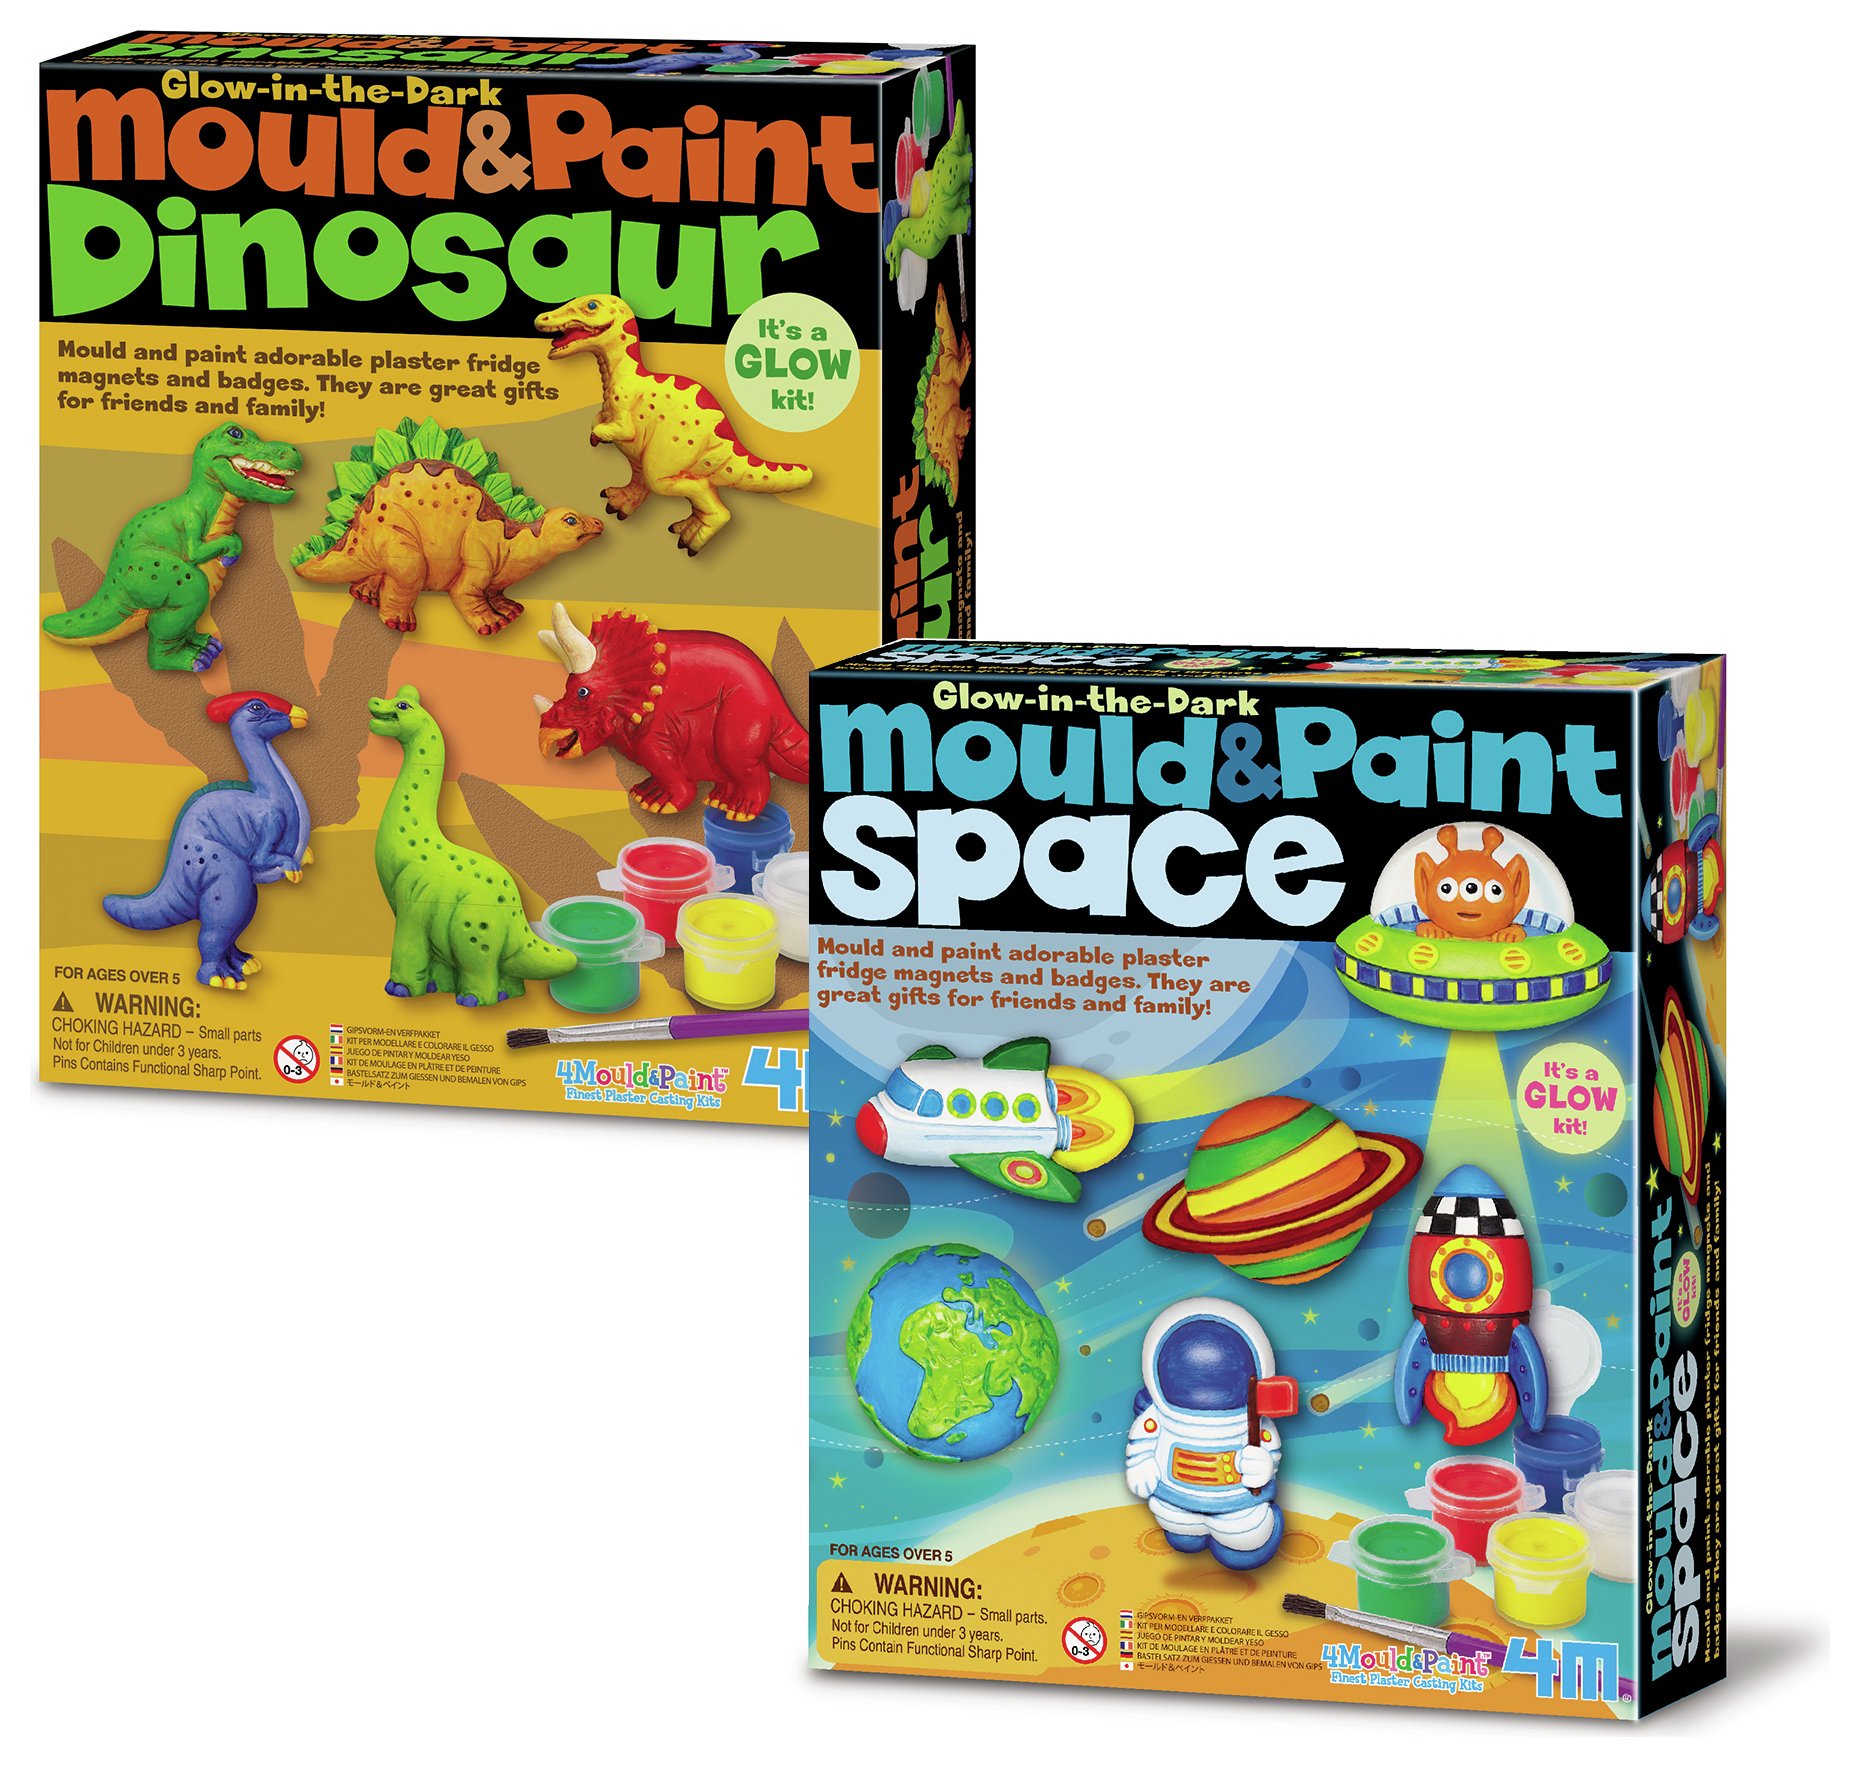 4M Mould & Paint Dinosaur and Mould & Paint Space- Twin Pack